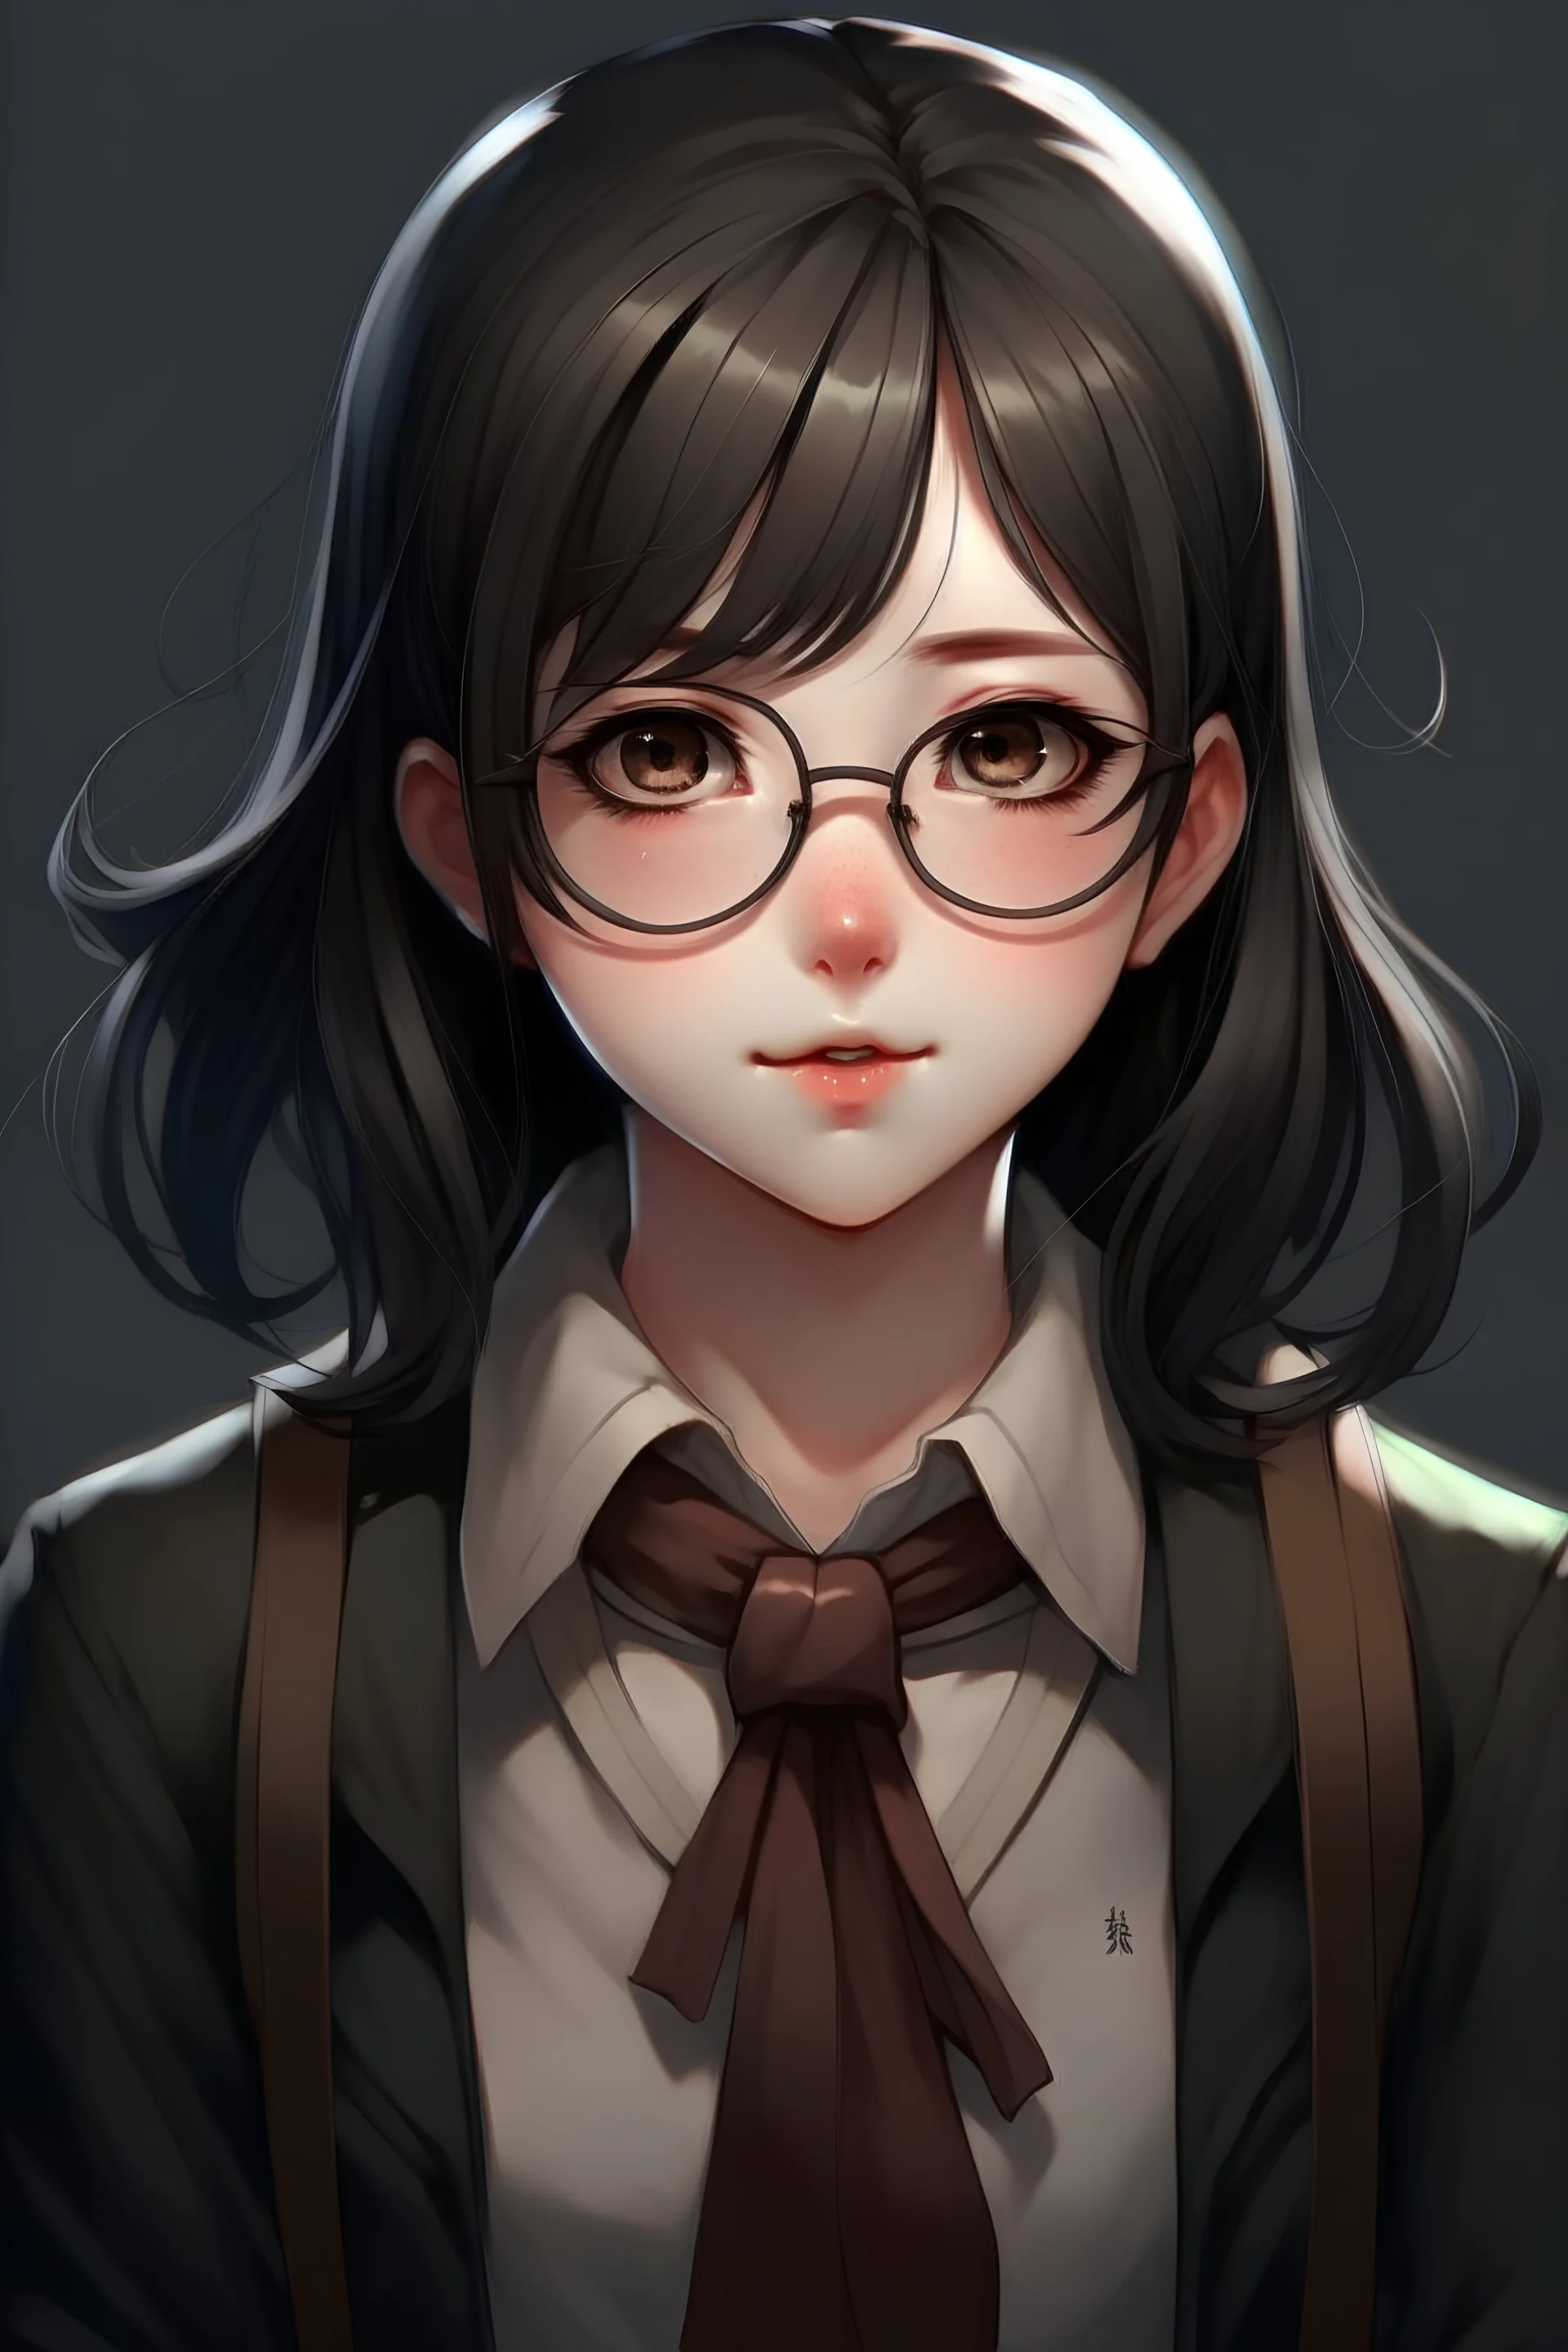 Realistic anime sakimichan art style. A lithe preppy dark-haired college girl. She has pale skin and light brown eyes, and her very short raven hair is haphazardly combed. She is wearing a what would be described as geek clothing